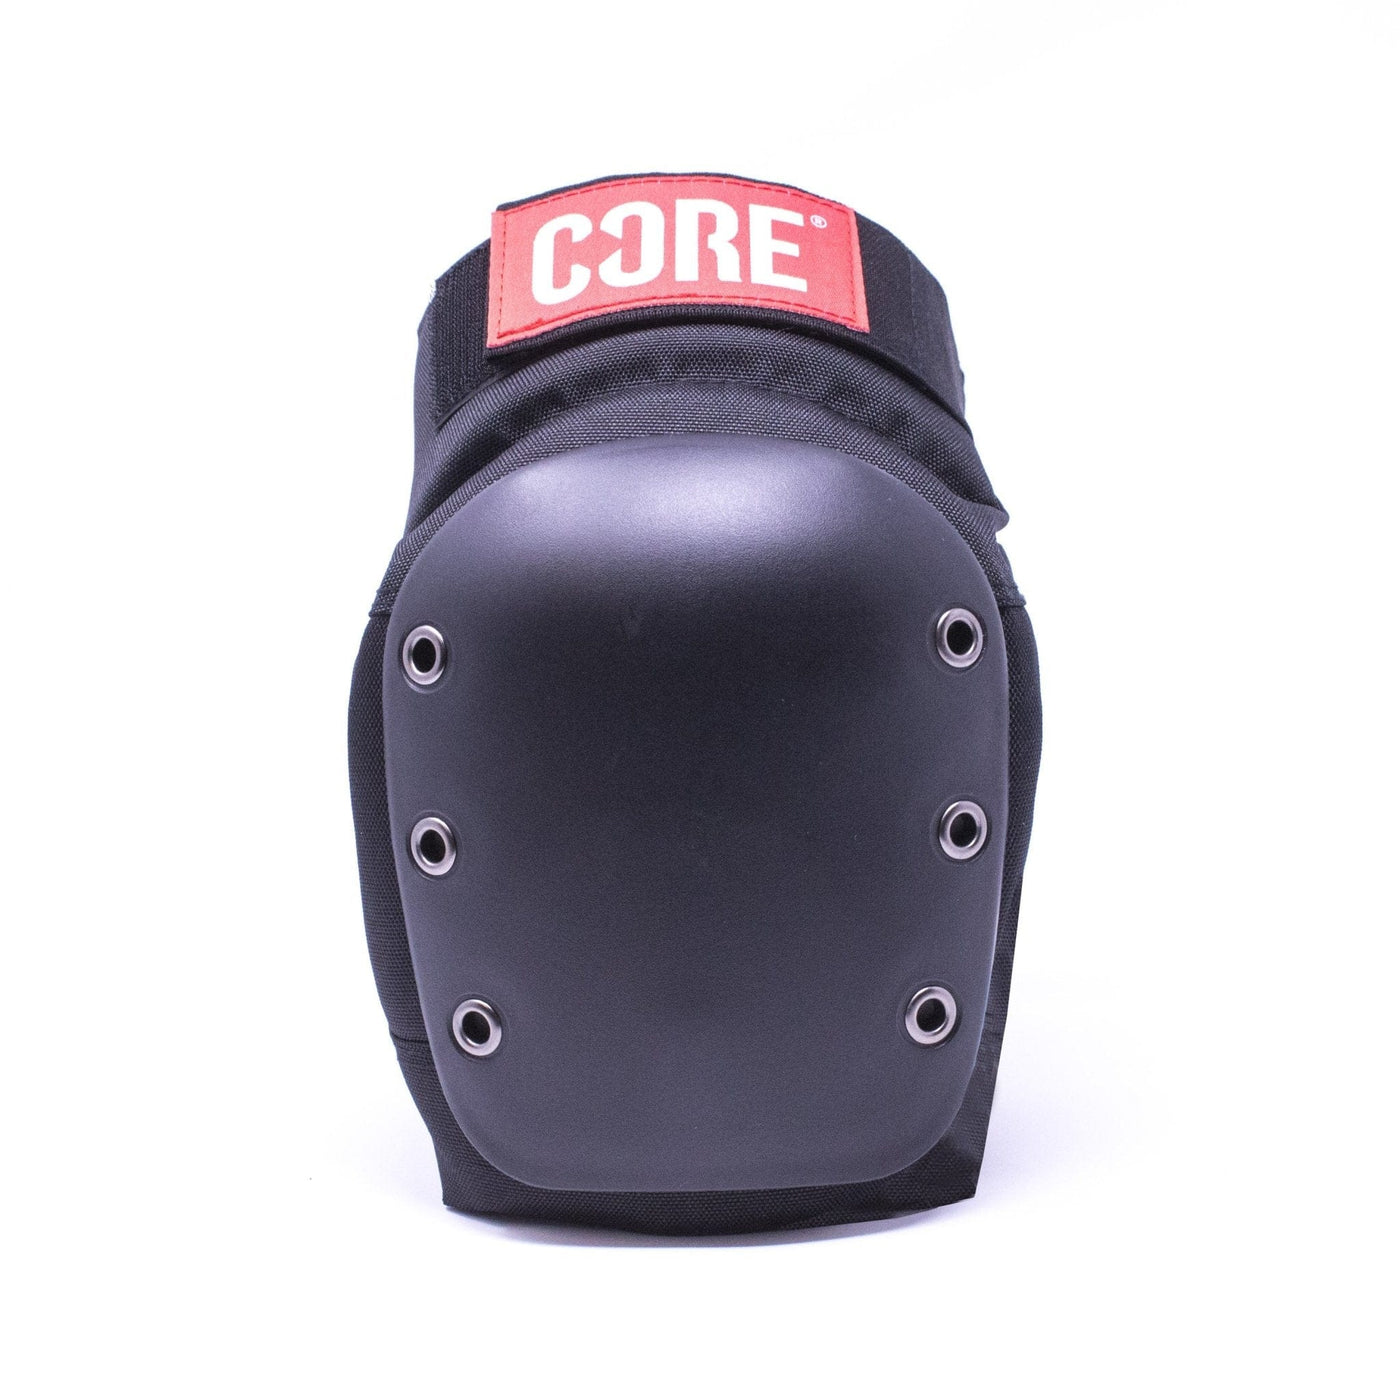 Core Protection Street Pro Skate Knee Pads I Knee Pad Skates Front View